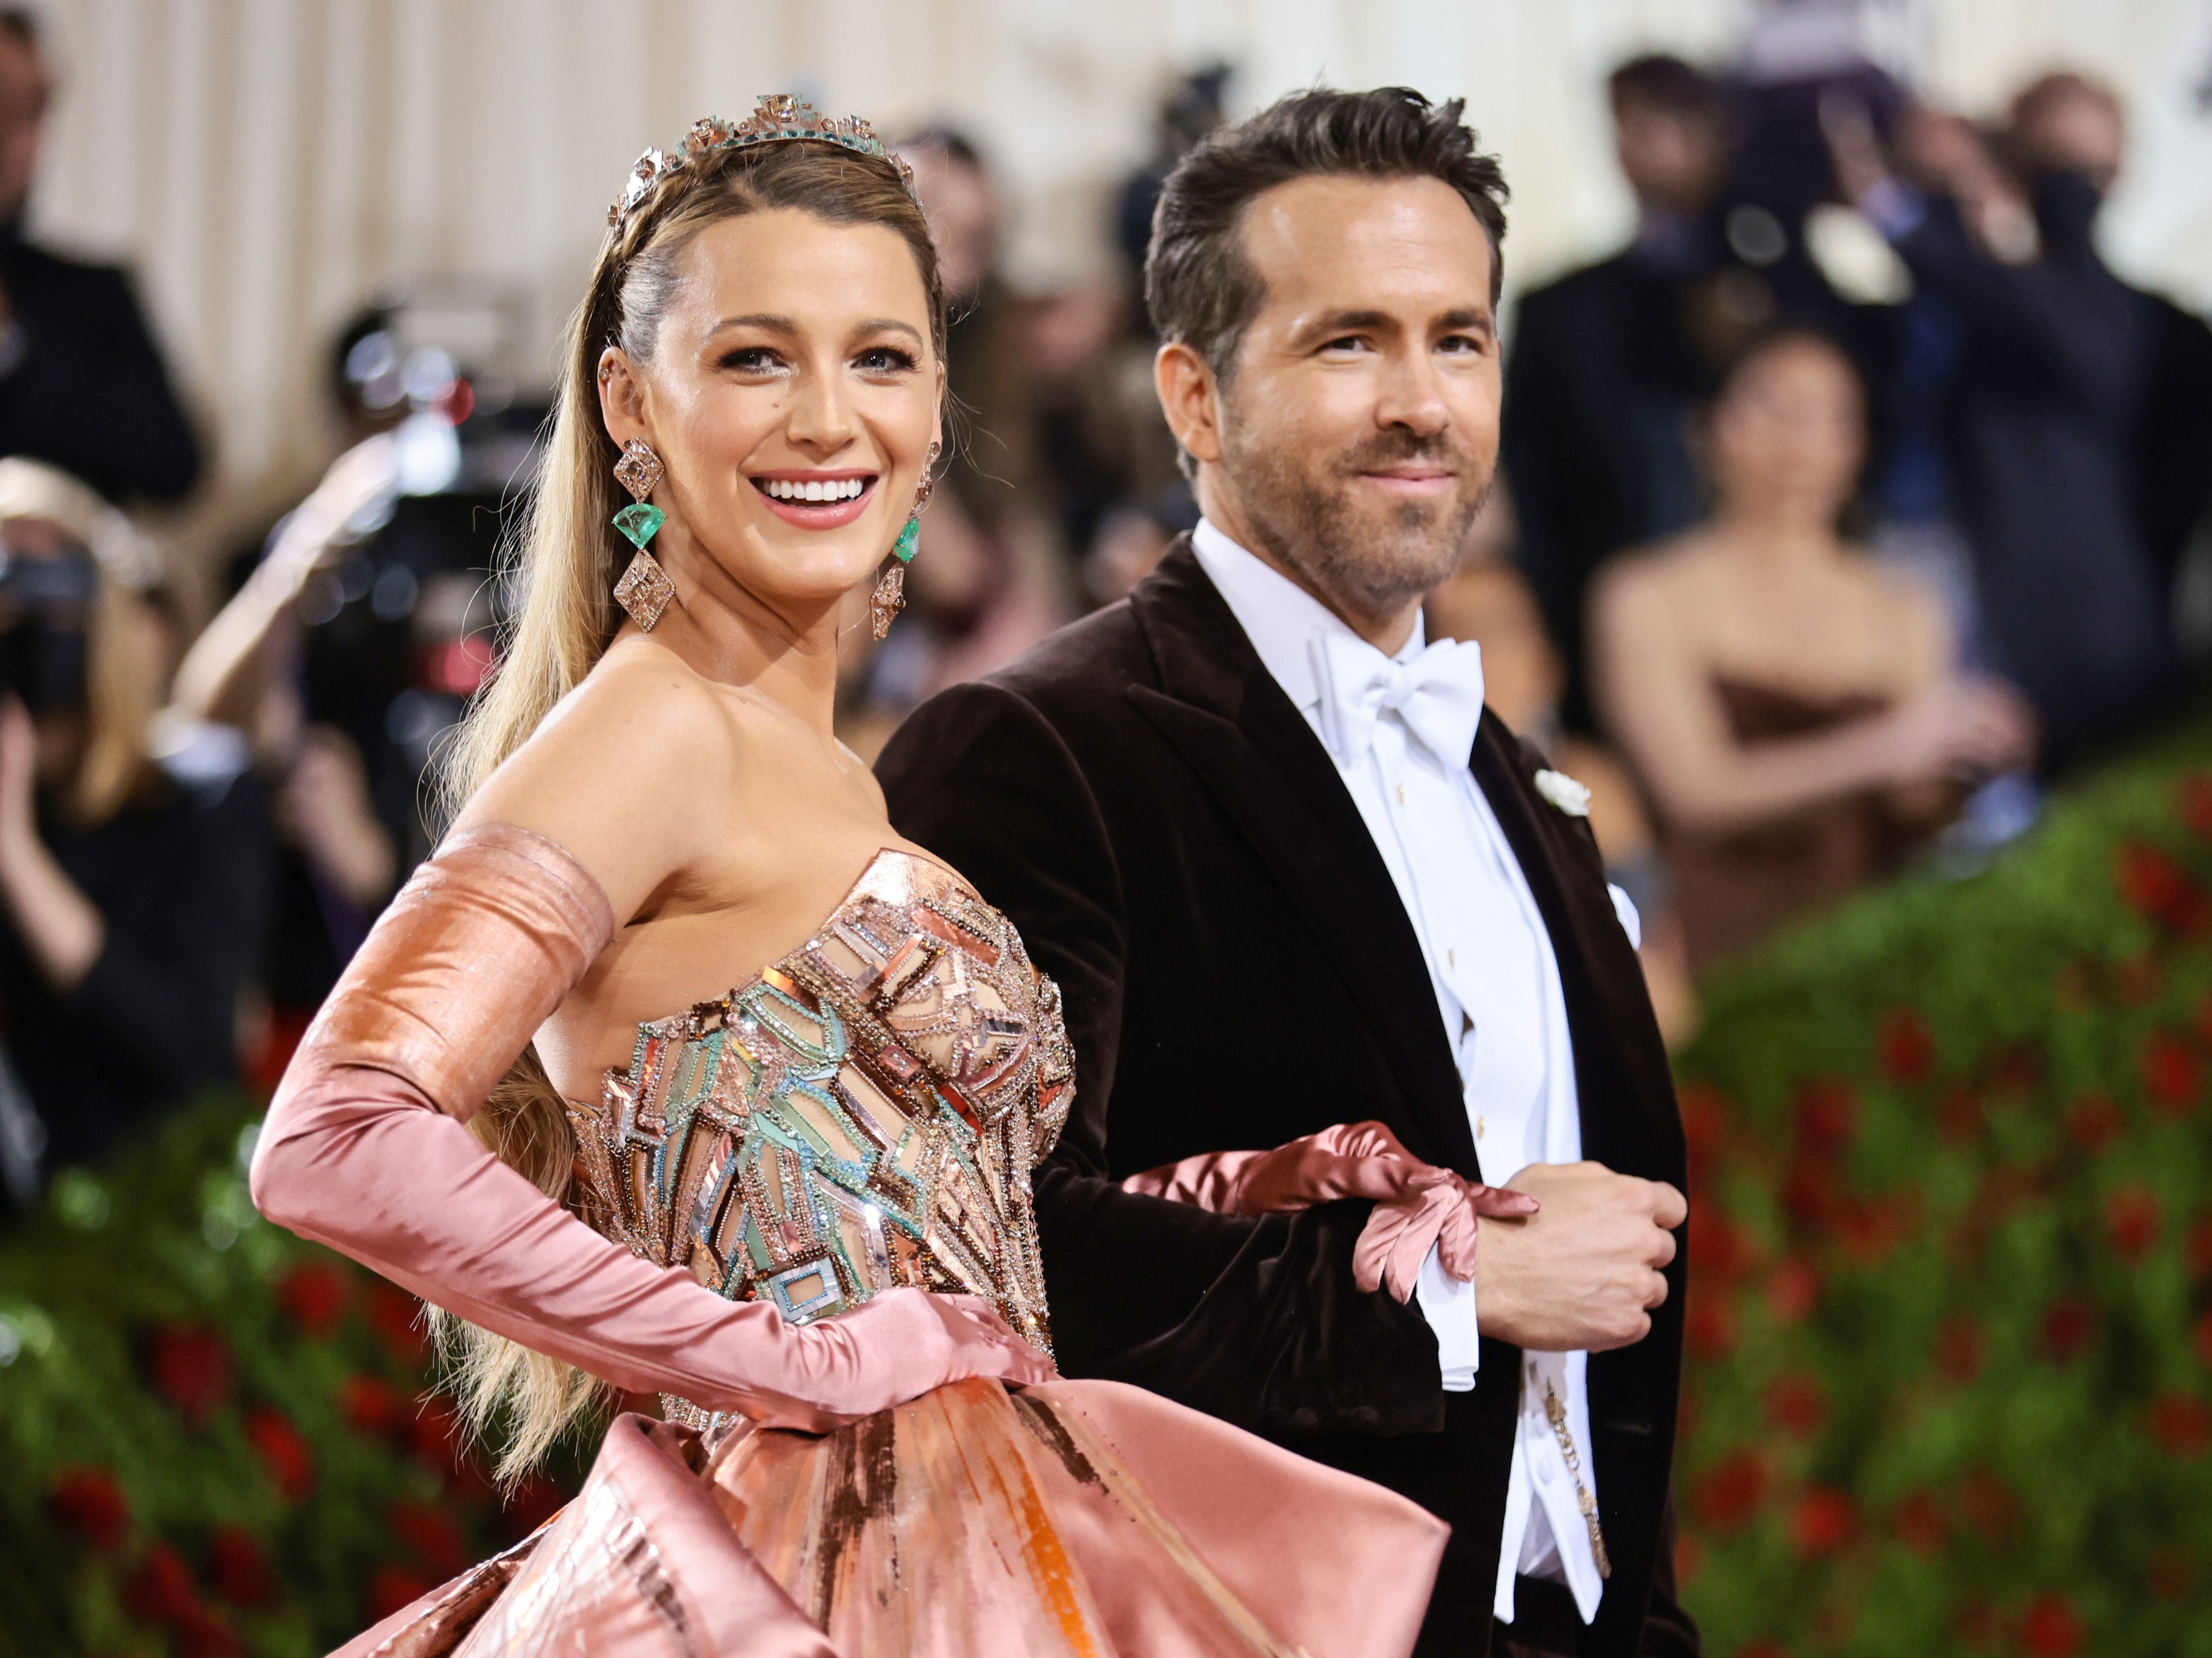 2022 Met Gala: Stars bring 'Gilded Glamour' to the red carpet